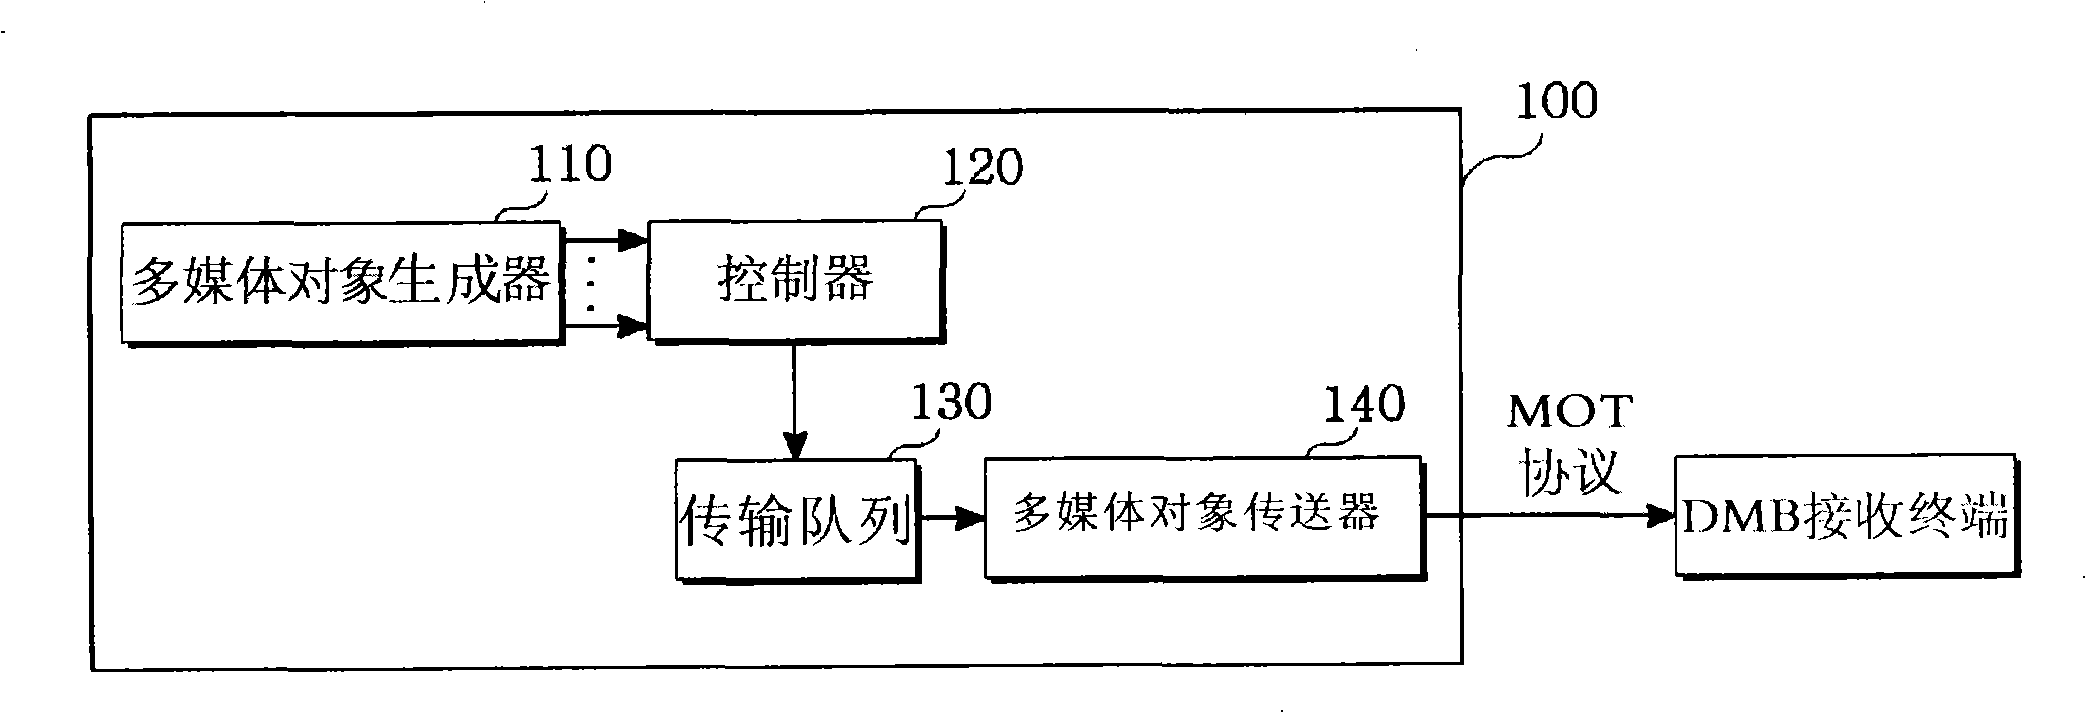 Apparatus and method for transmitting multimedia objects in digital multimedia broadcasting